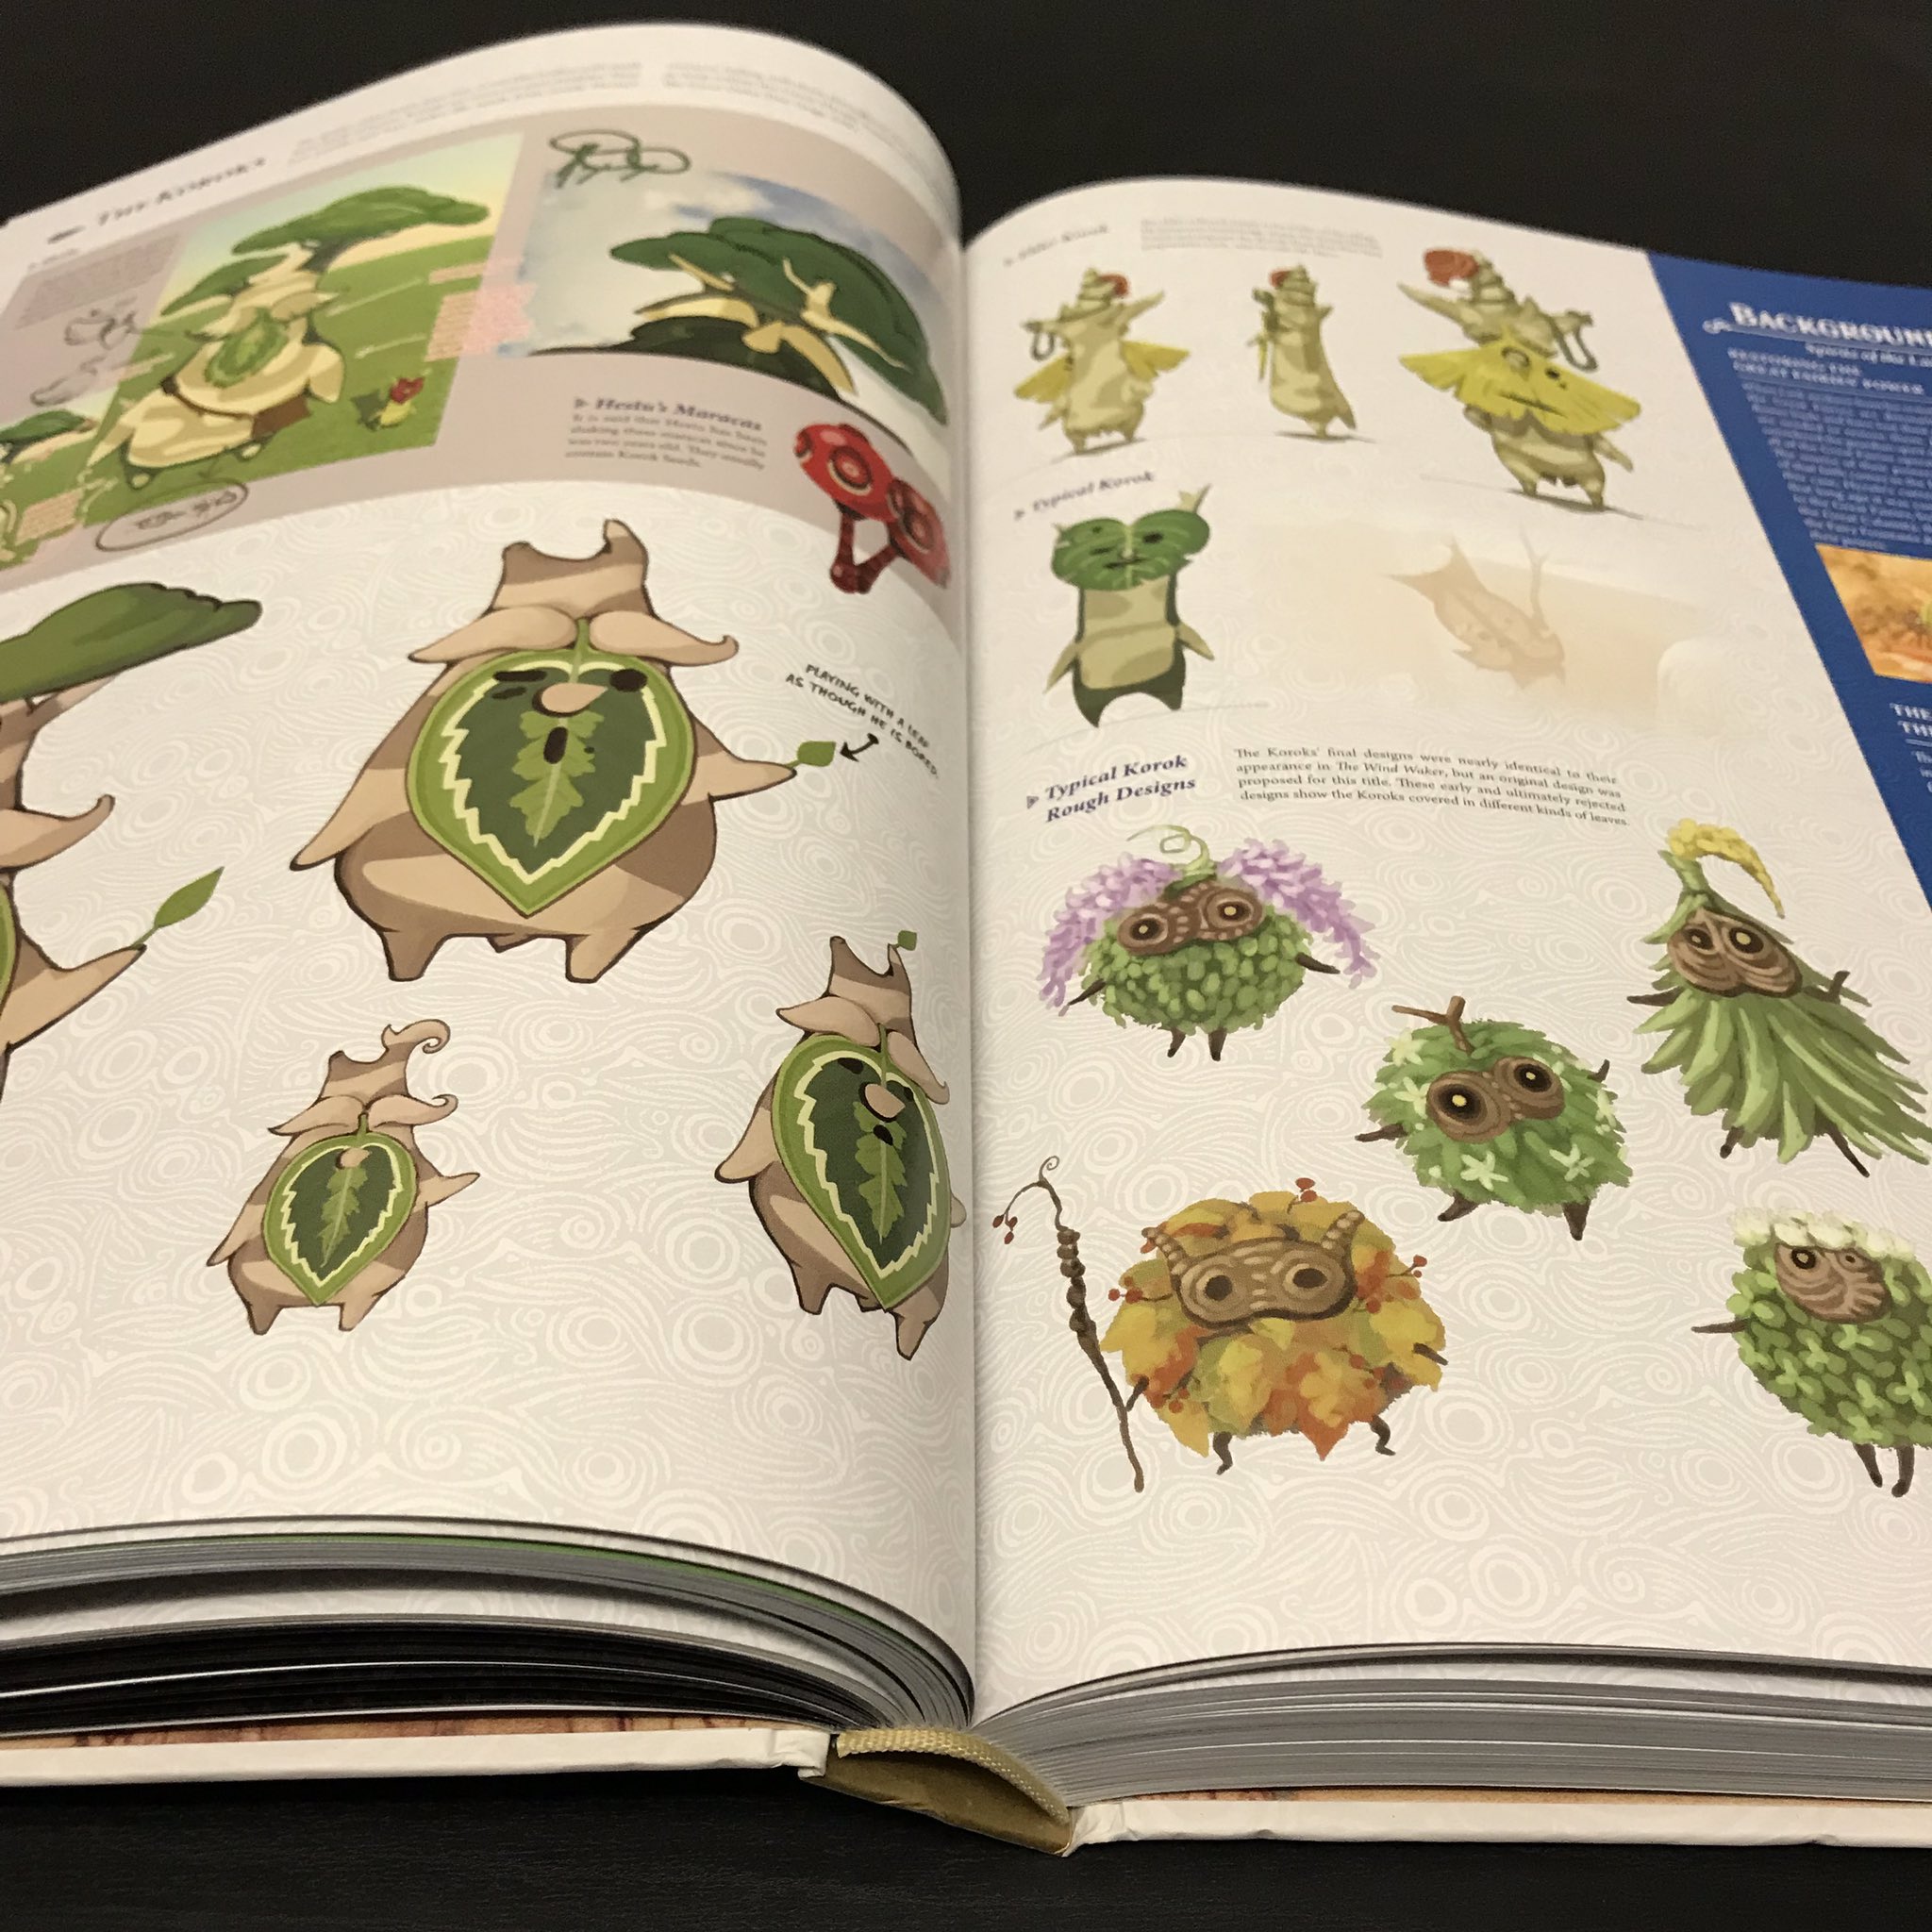 udsagnsord defile taxa The Legend of Zelda Breath of the Wild Creating a Champion encyclopedia  available now - NintendObserver